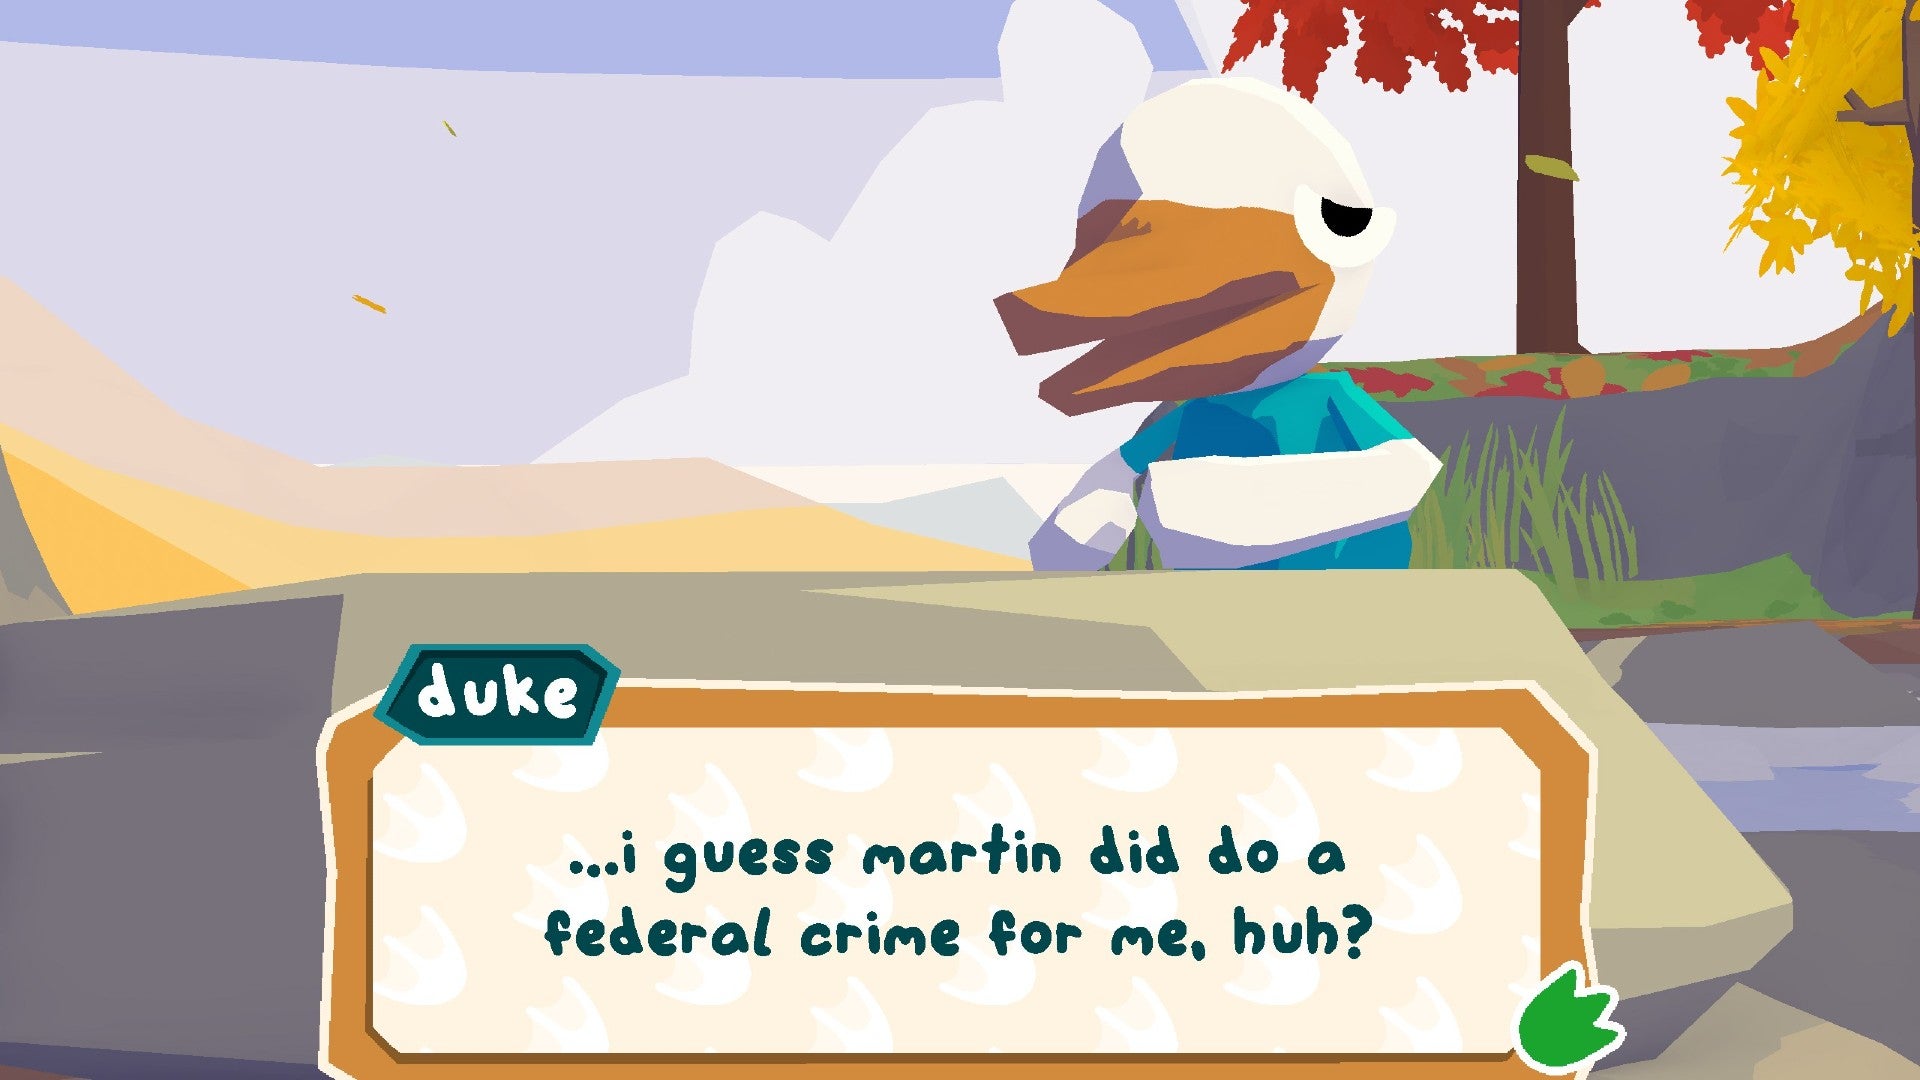 Lil Gator Game screenshot, in which Duke talks about Martin doing a federal crime on trial.